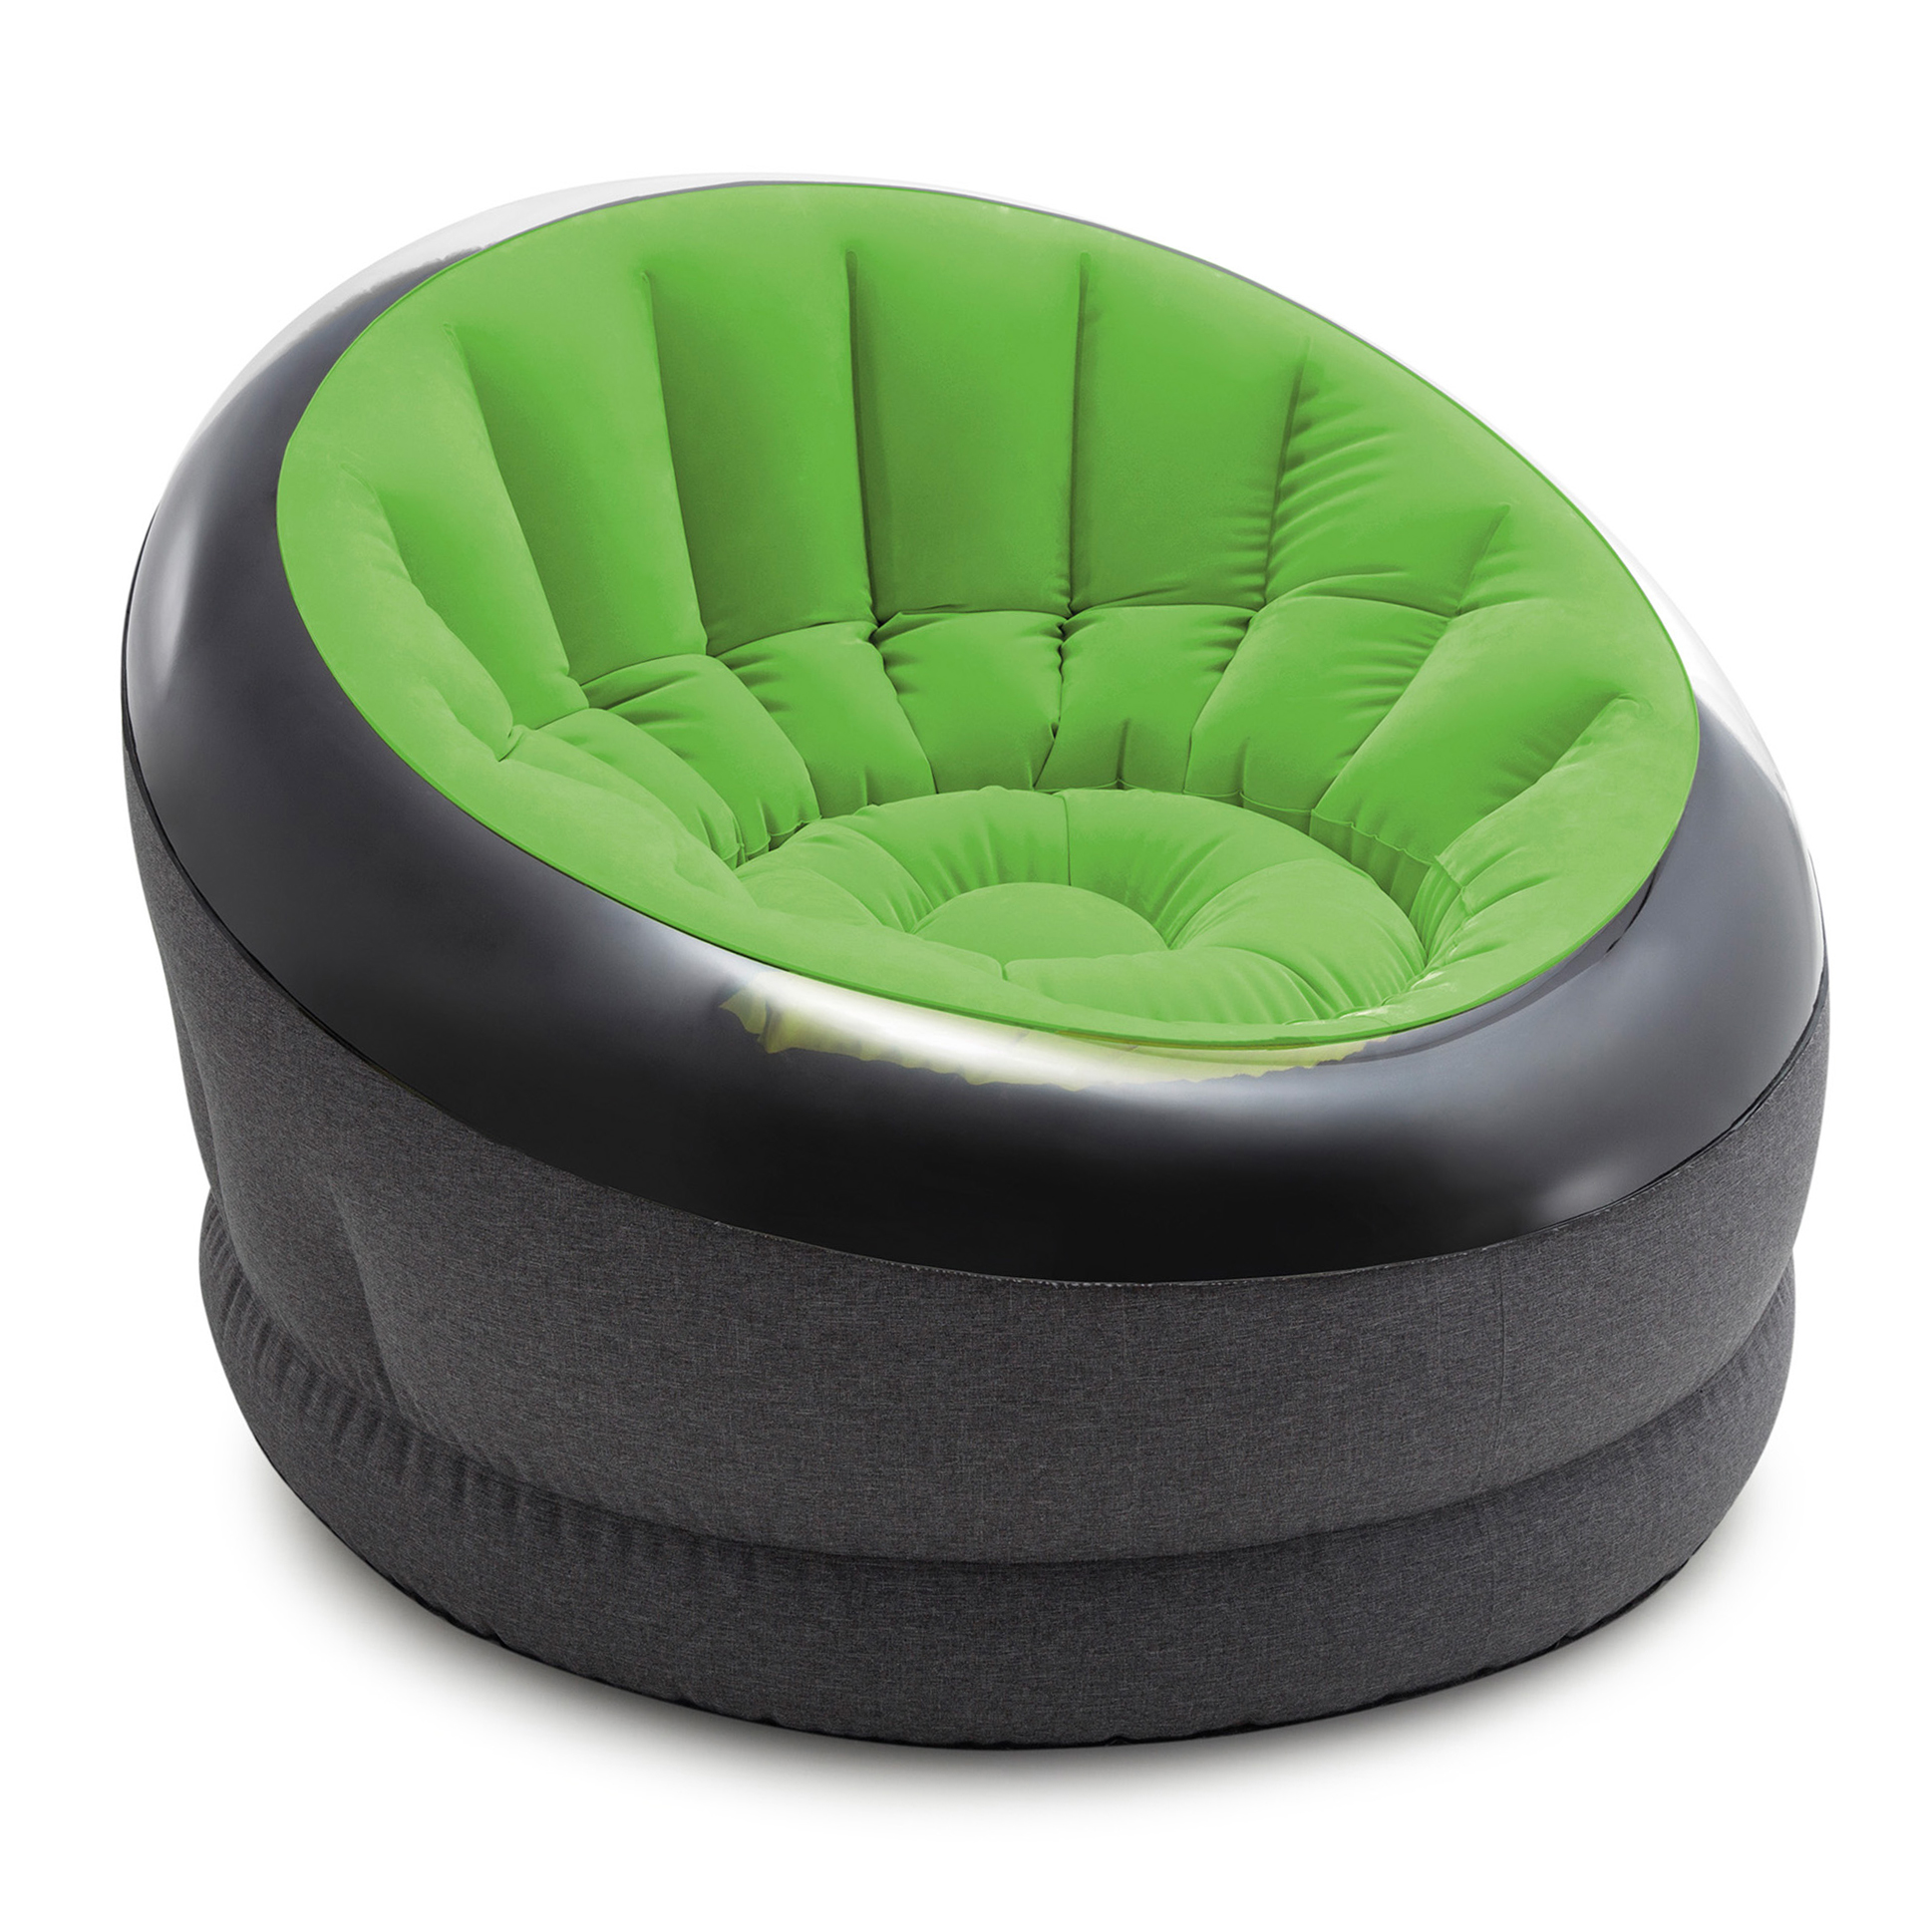 Intex Empire Indoor Inflatable Blow Up Dorm Room Lounge Air Chair, Lime